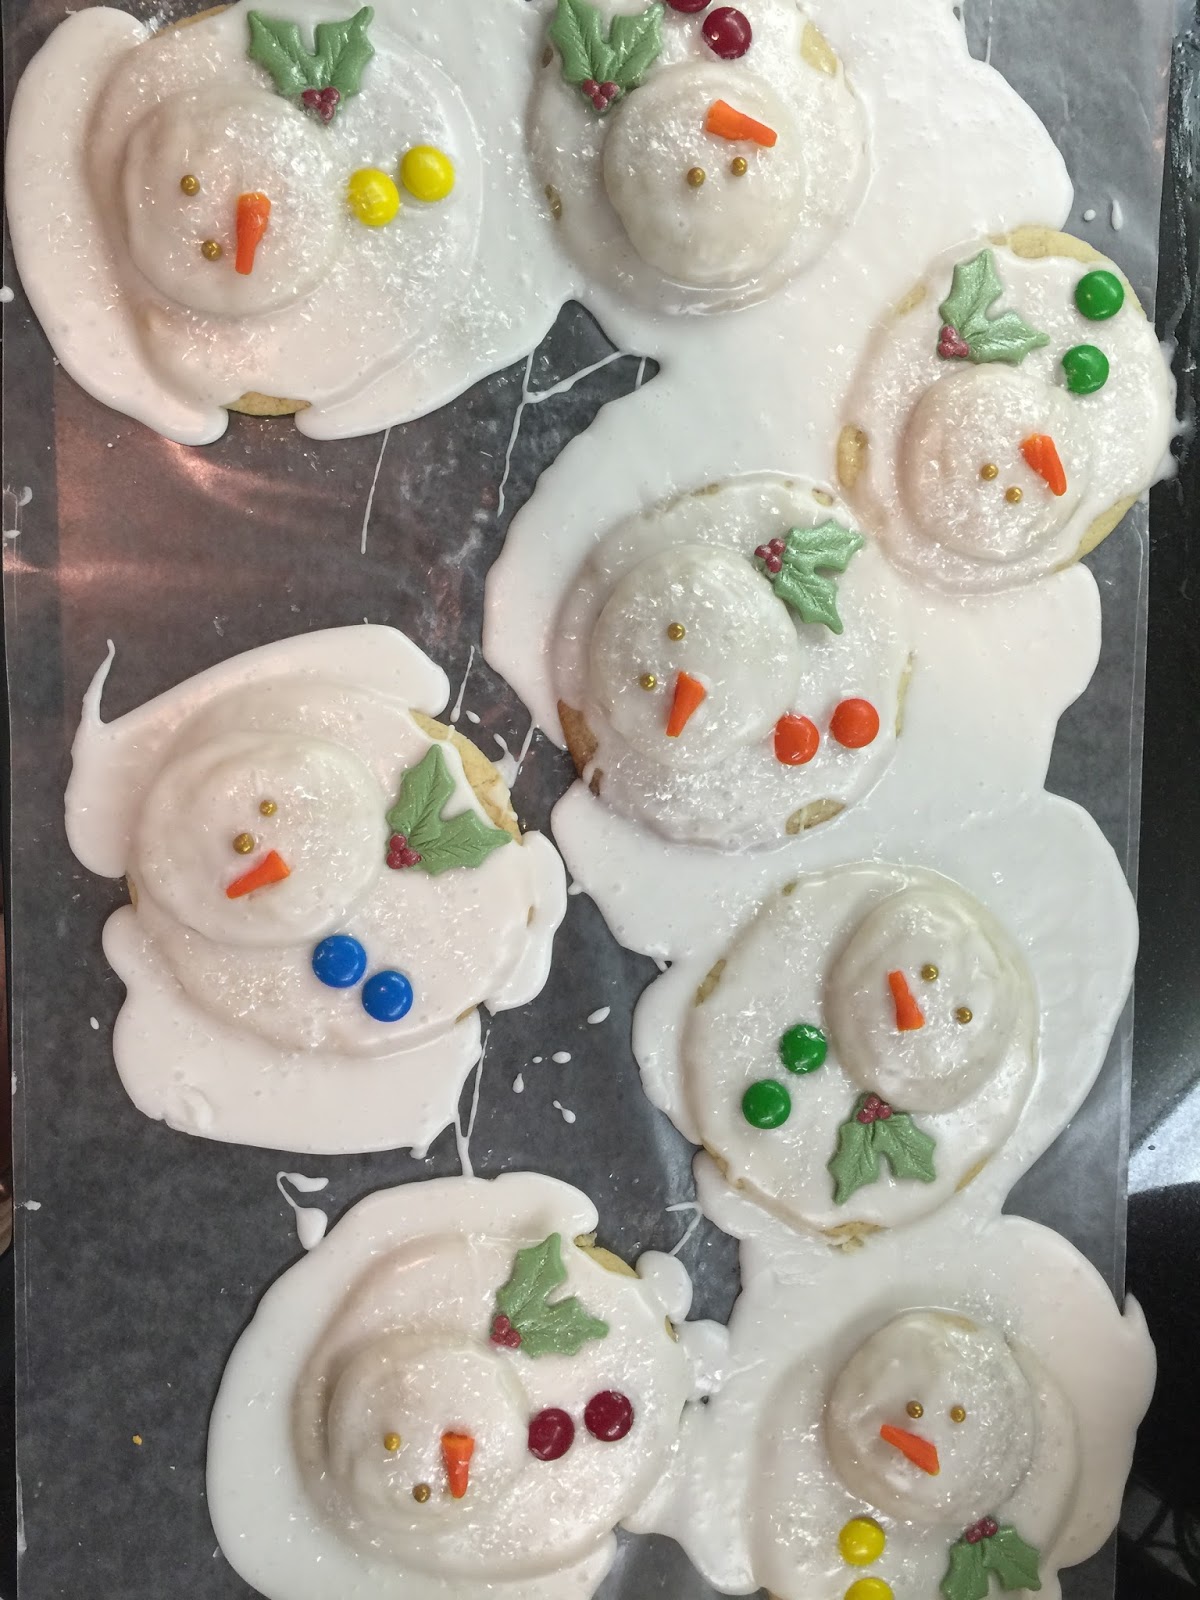 Make it Delightful!: Easy To Make Melted Snowman Cookies